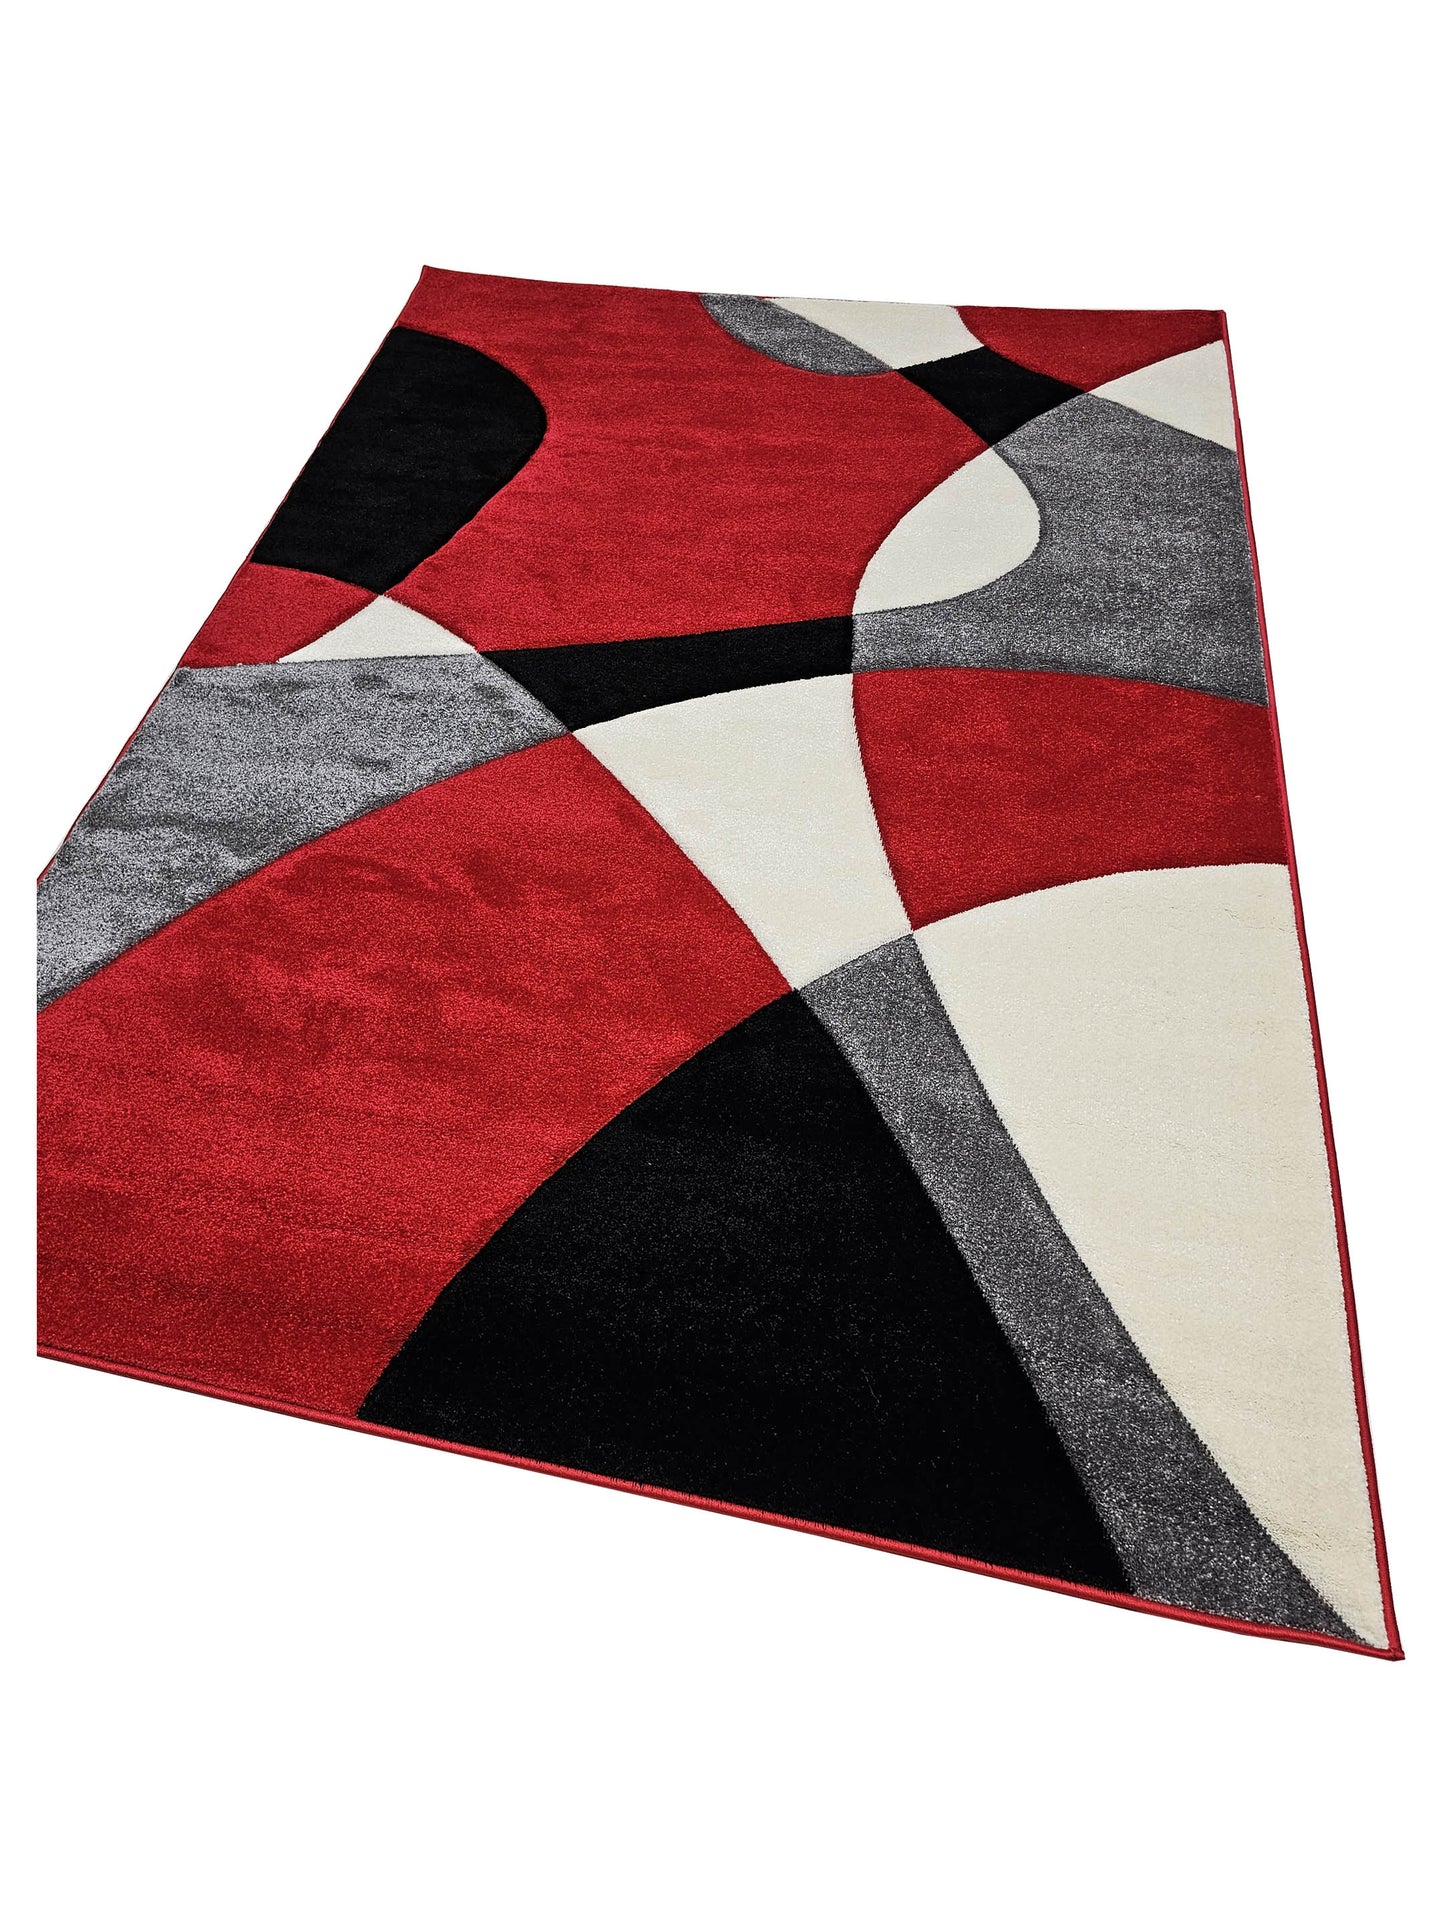 American Cover Design Hollywood  H-284 Red  Modern Machinemade Rug